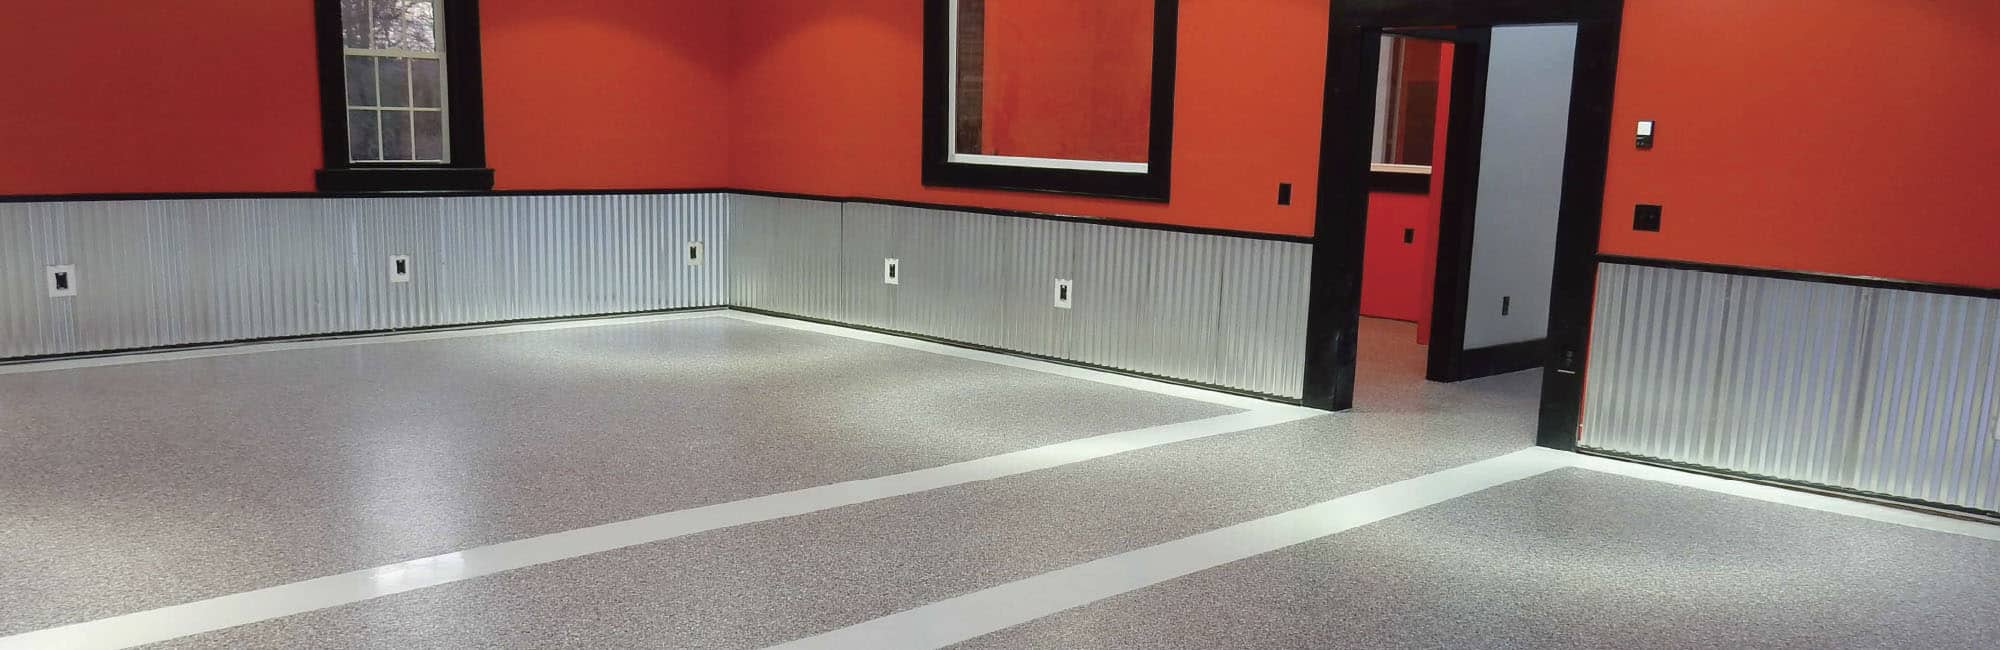 Epoxy Flooring Services in Indiana